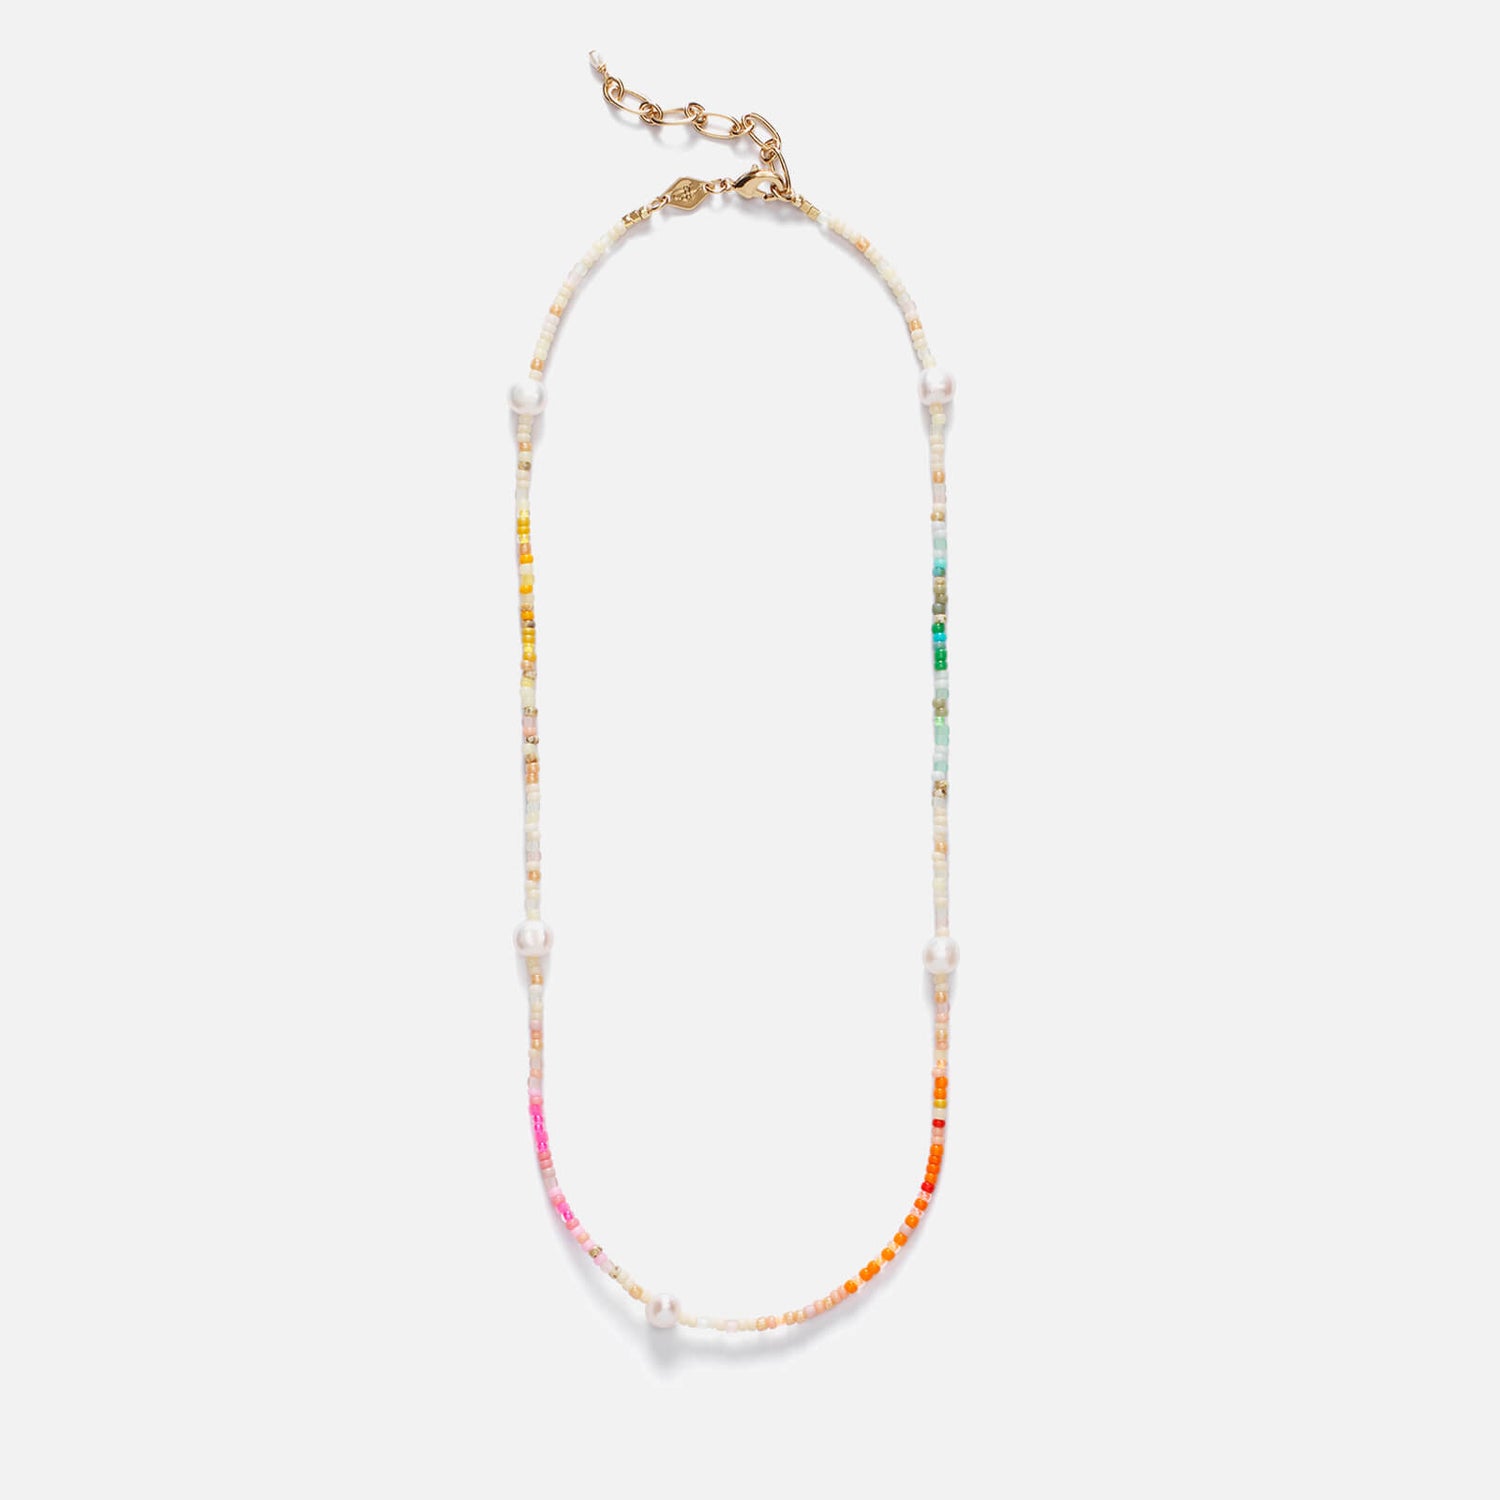 Anni Lu Rainbow Nomad Pearl and Bead Necklace